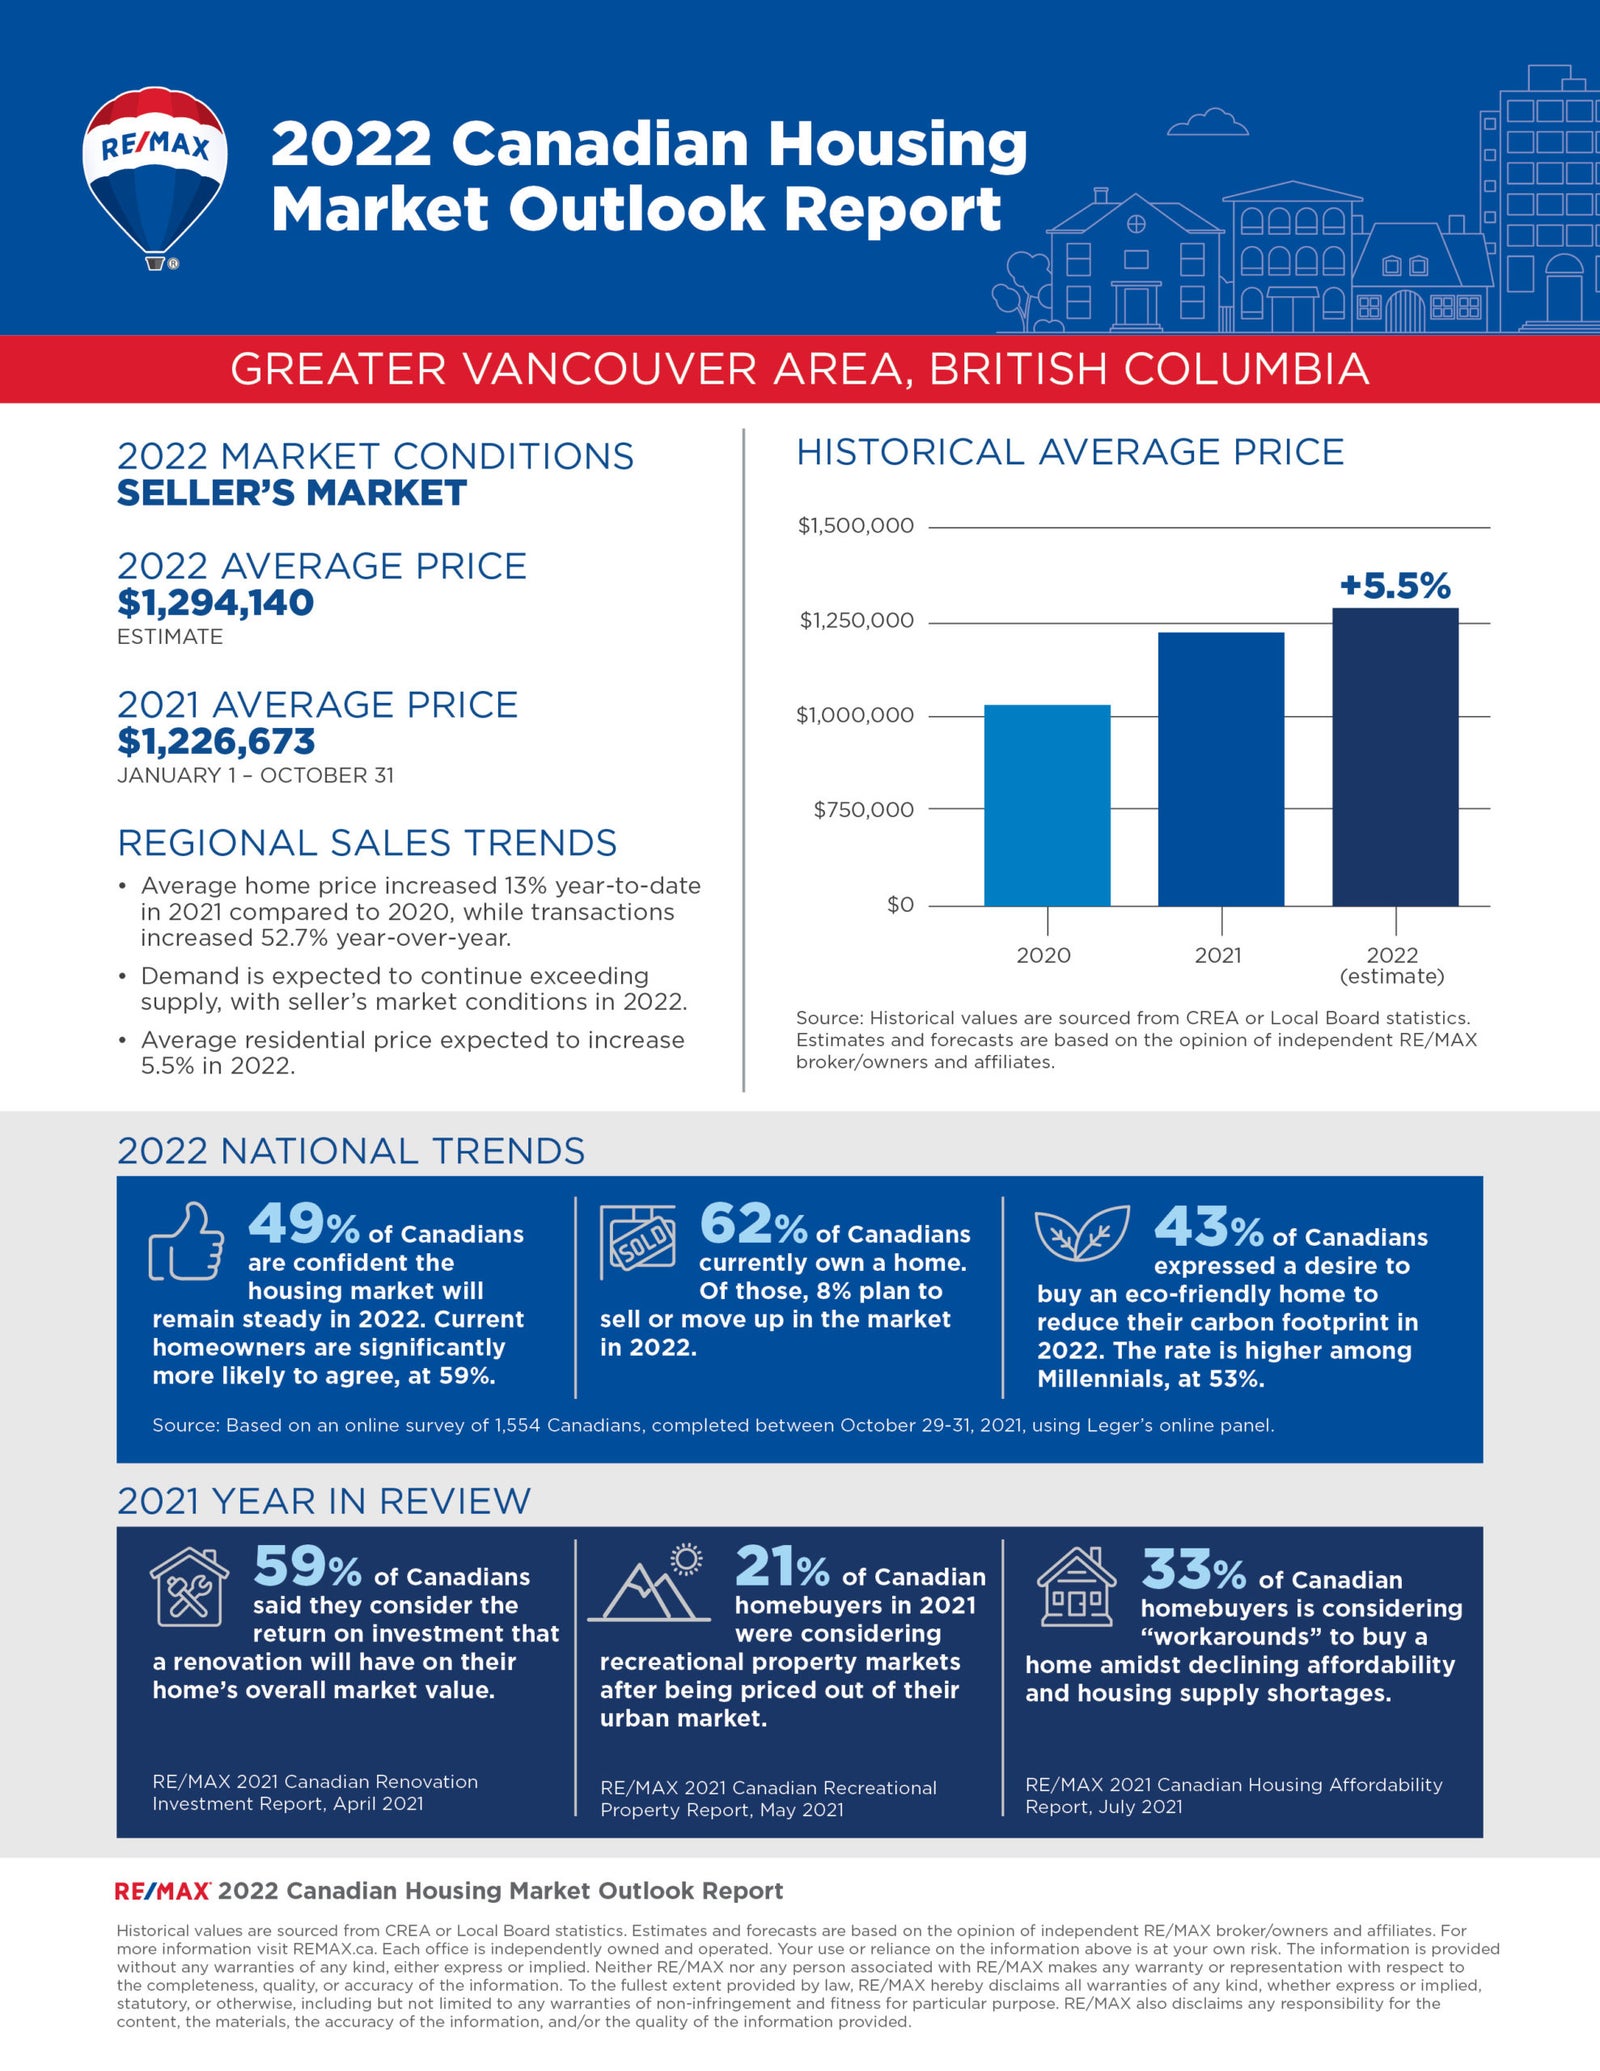 Tim Wray - RE/MAX Crest Realty, 2021 Housing Outlook, Vancouver